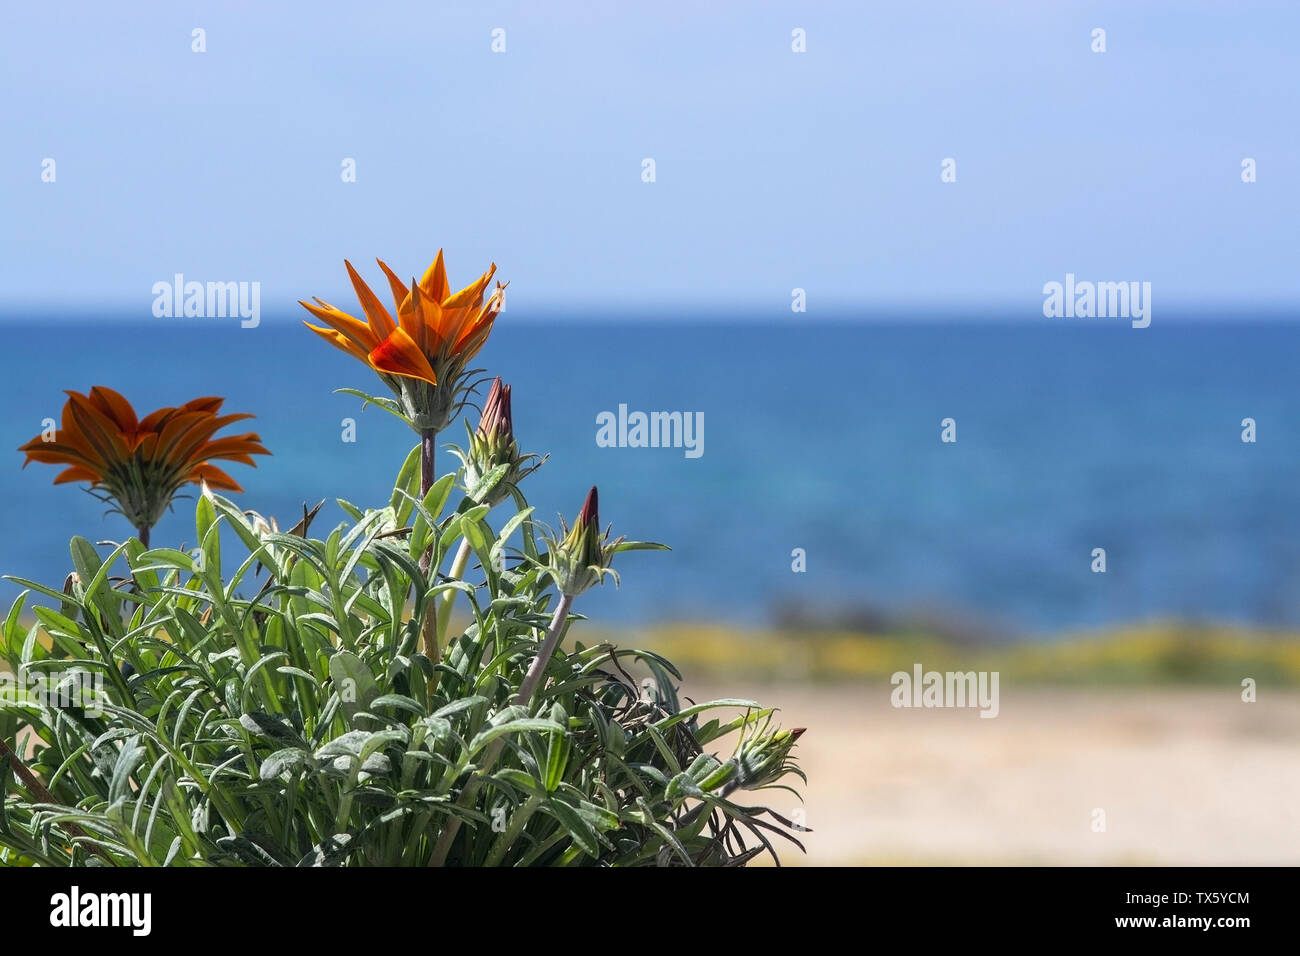 Bright orange aster like flower with blue sea and horizon out of focus with copy space, Mediterranean Spain. Stock Photo